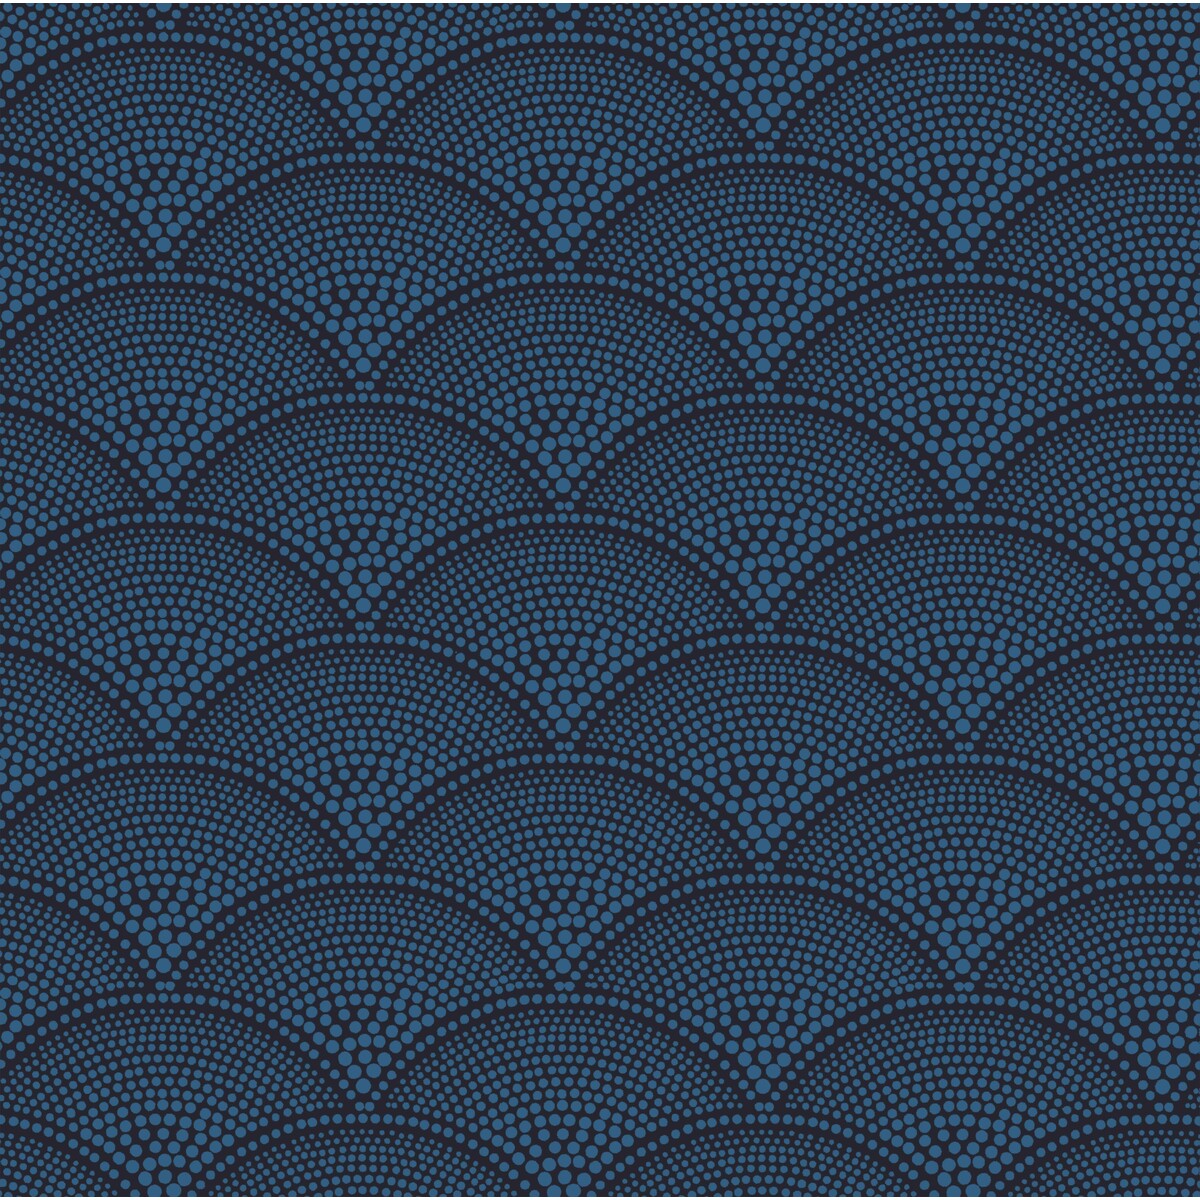 Feather Fan fabric in hyac on char color - pattern F111/8028.CS.0 - by Cole &amp; Son in the Cole &amp; Son Contemporary Fabrics collection